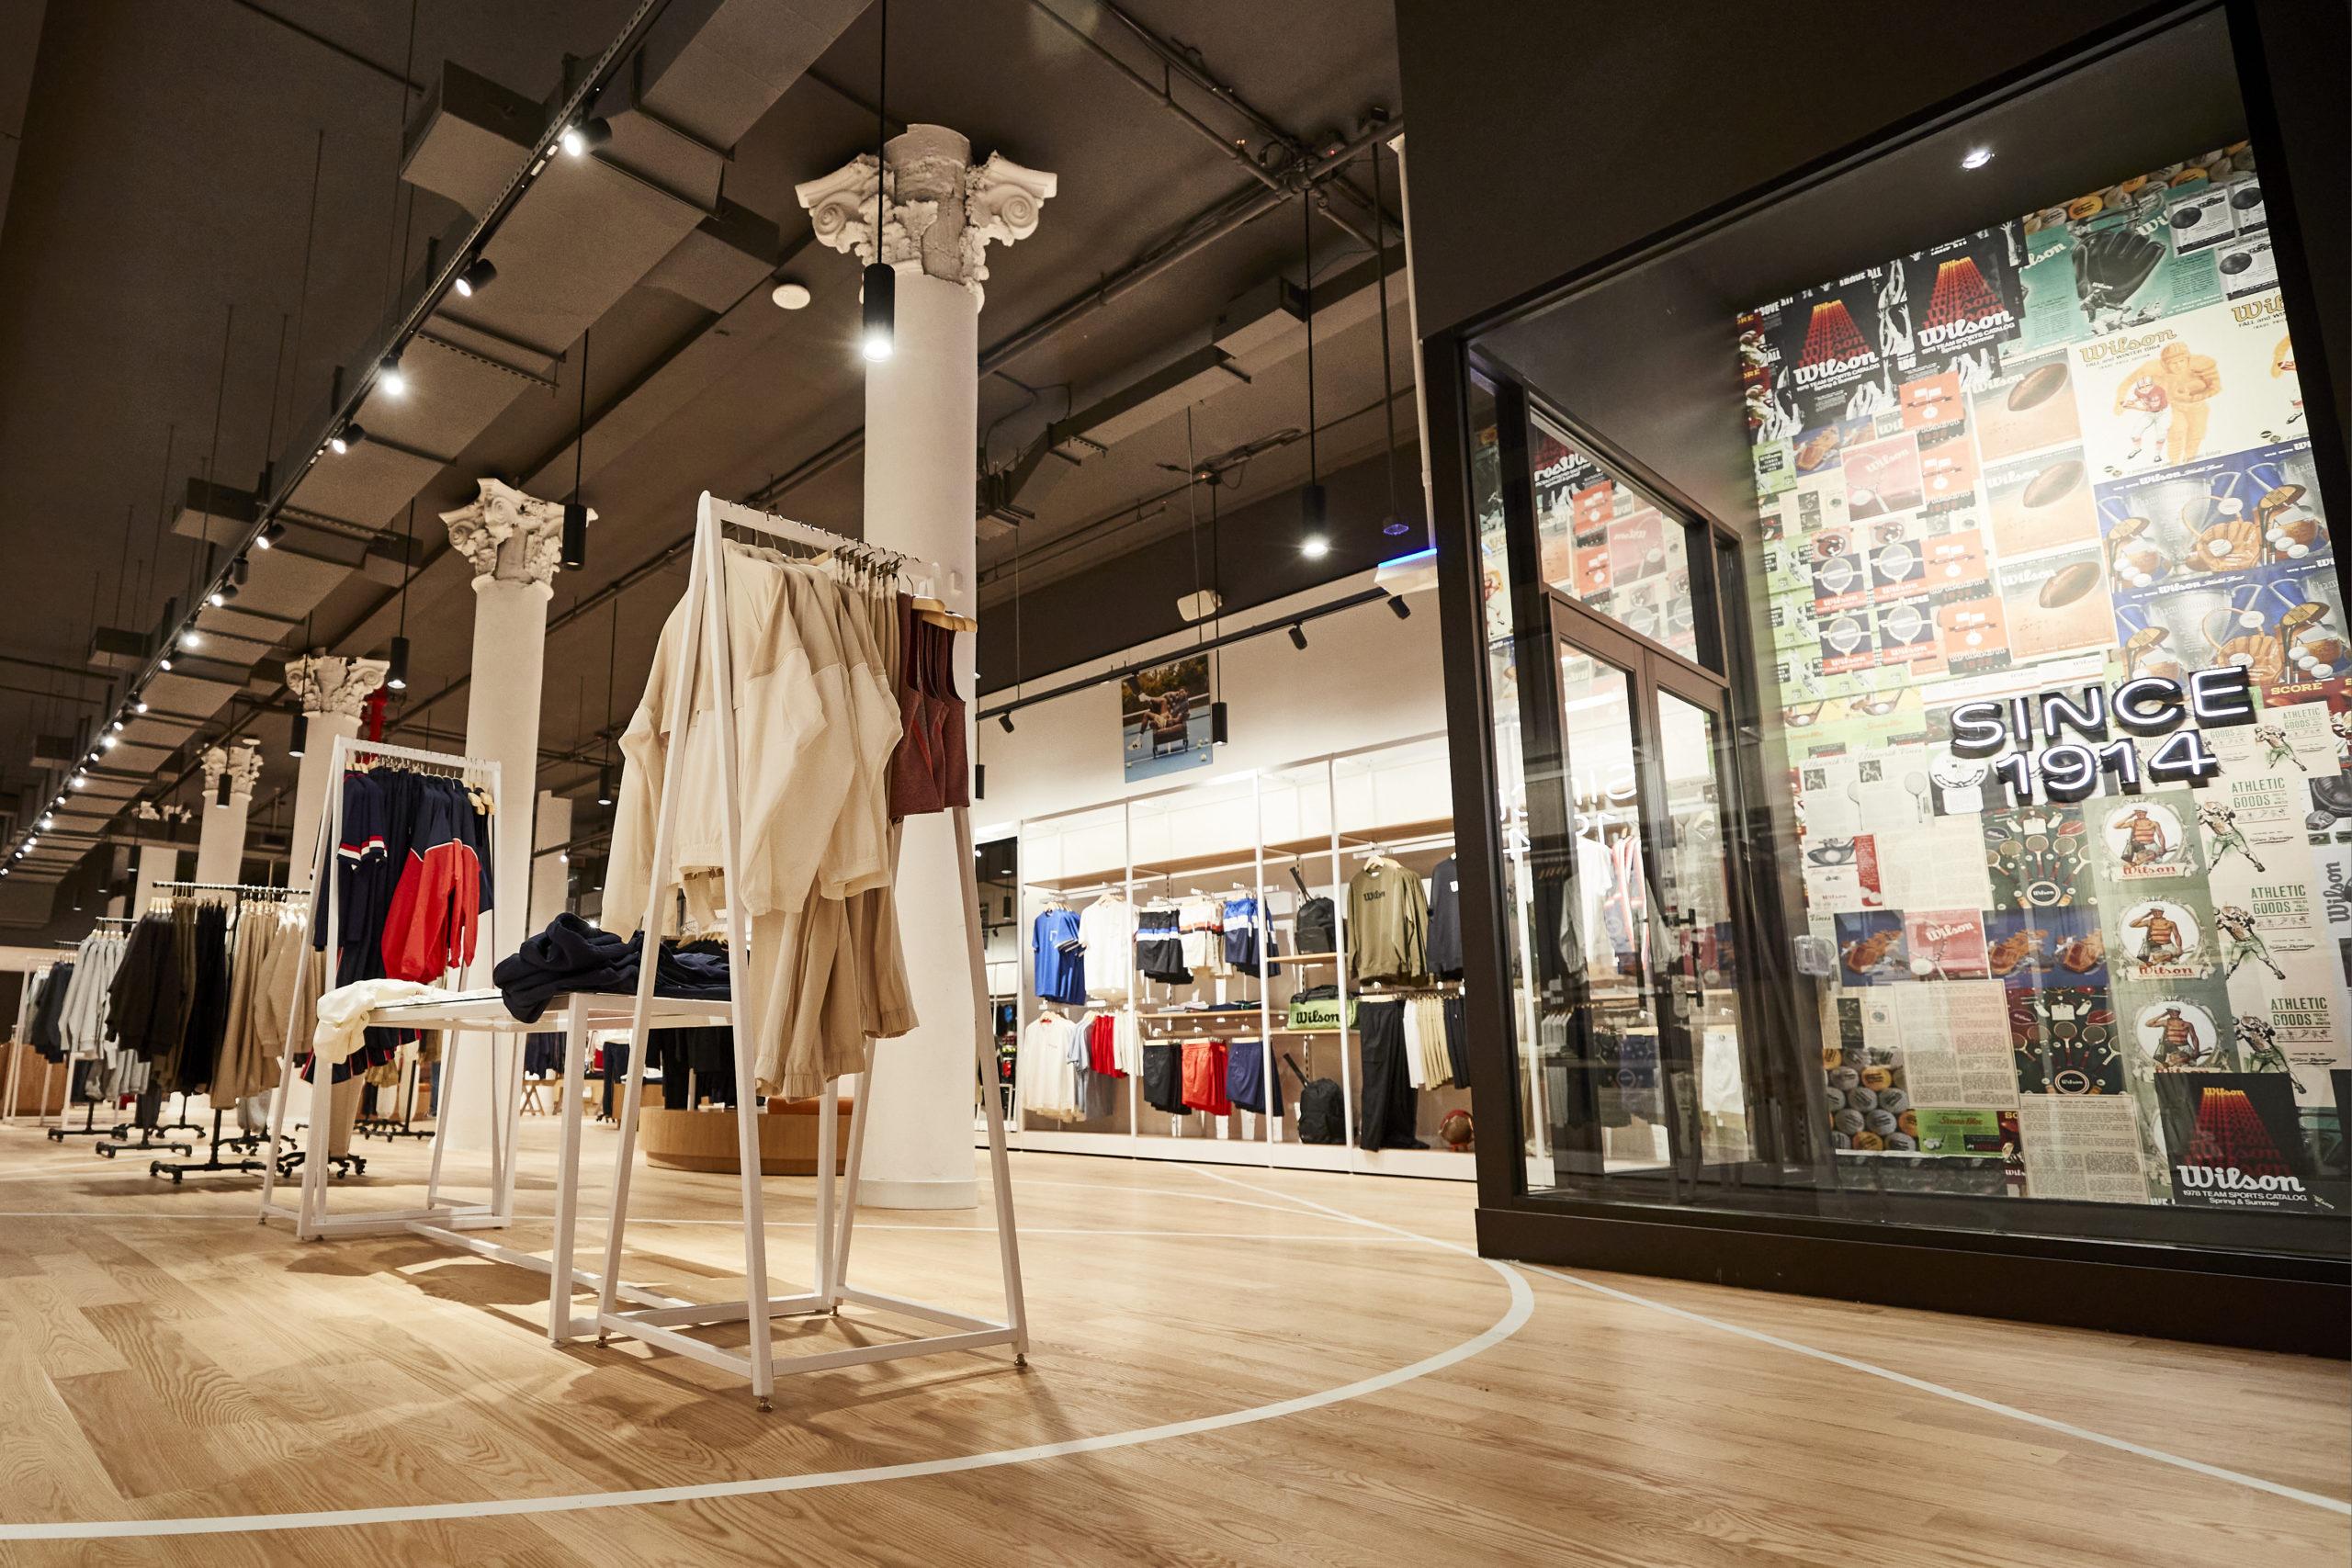 WILSON SPORTING GOODS OPENS NYC FLAGSHIP STORE - Made for the W